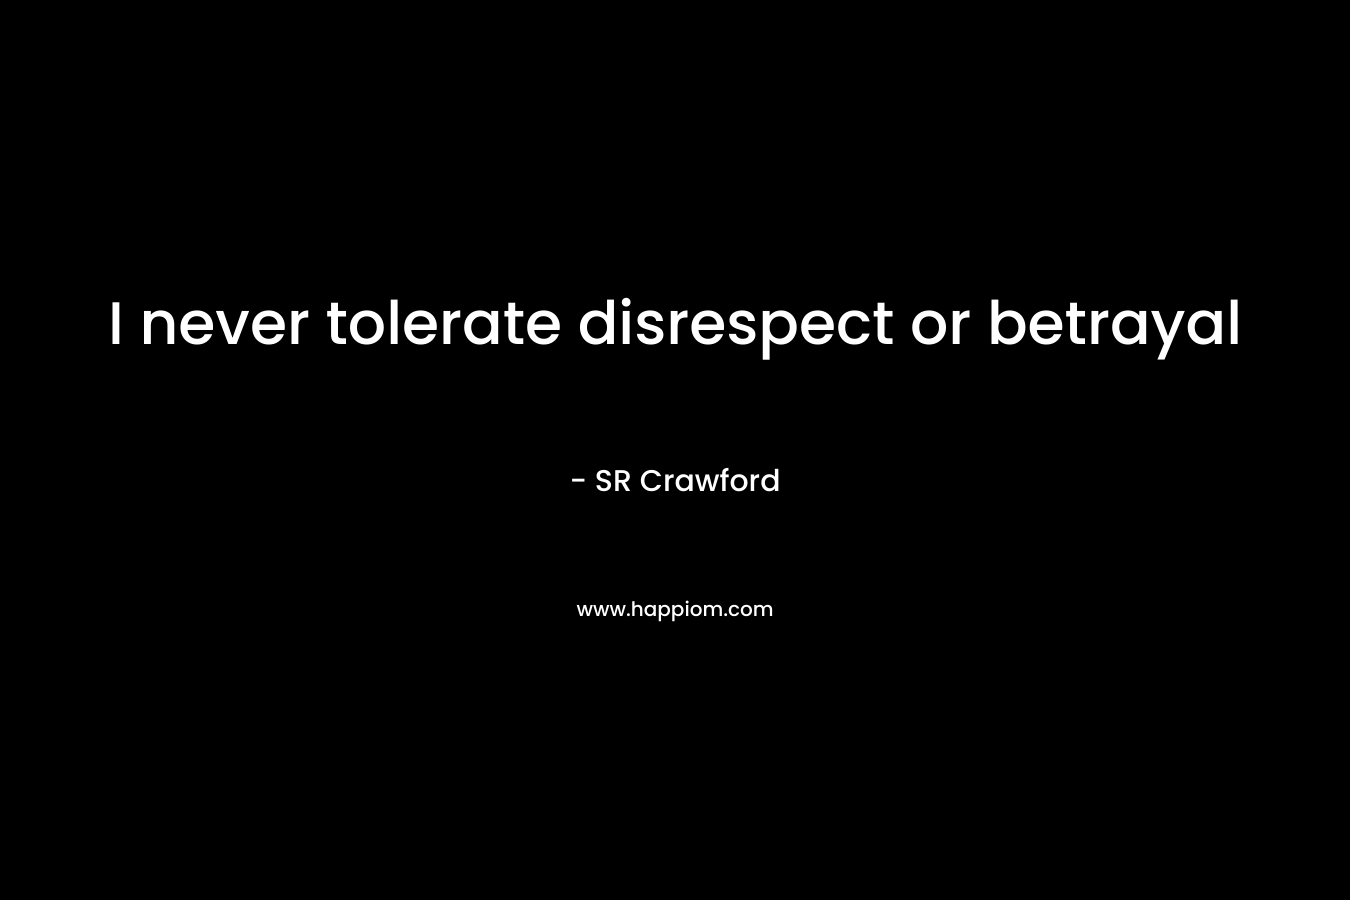 I never tolerate disrespect or betrayal